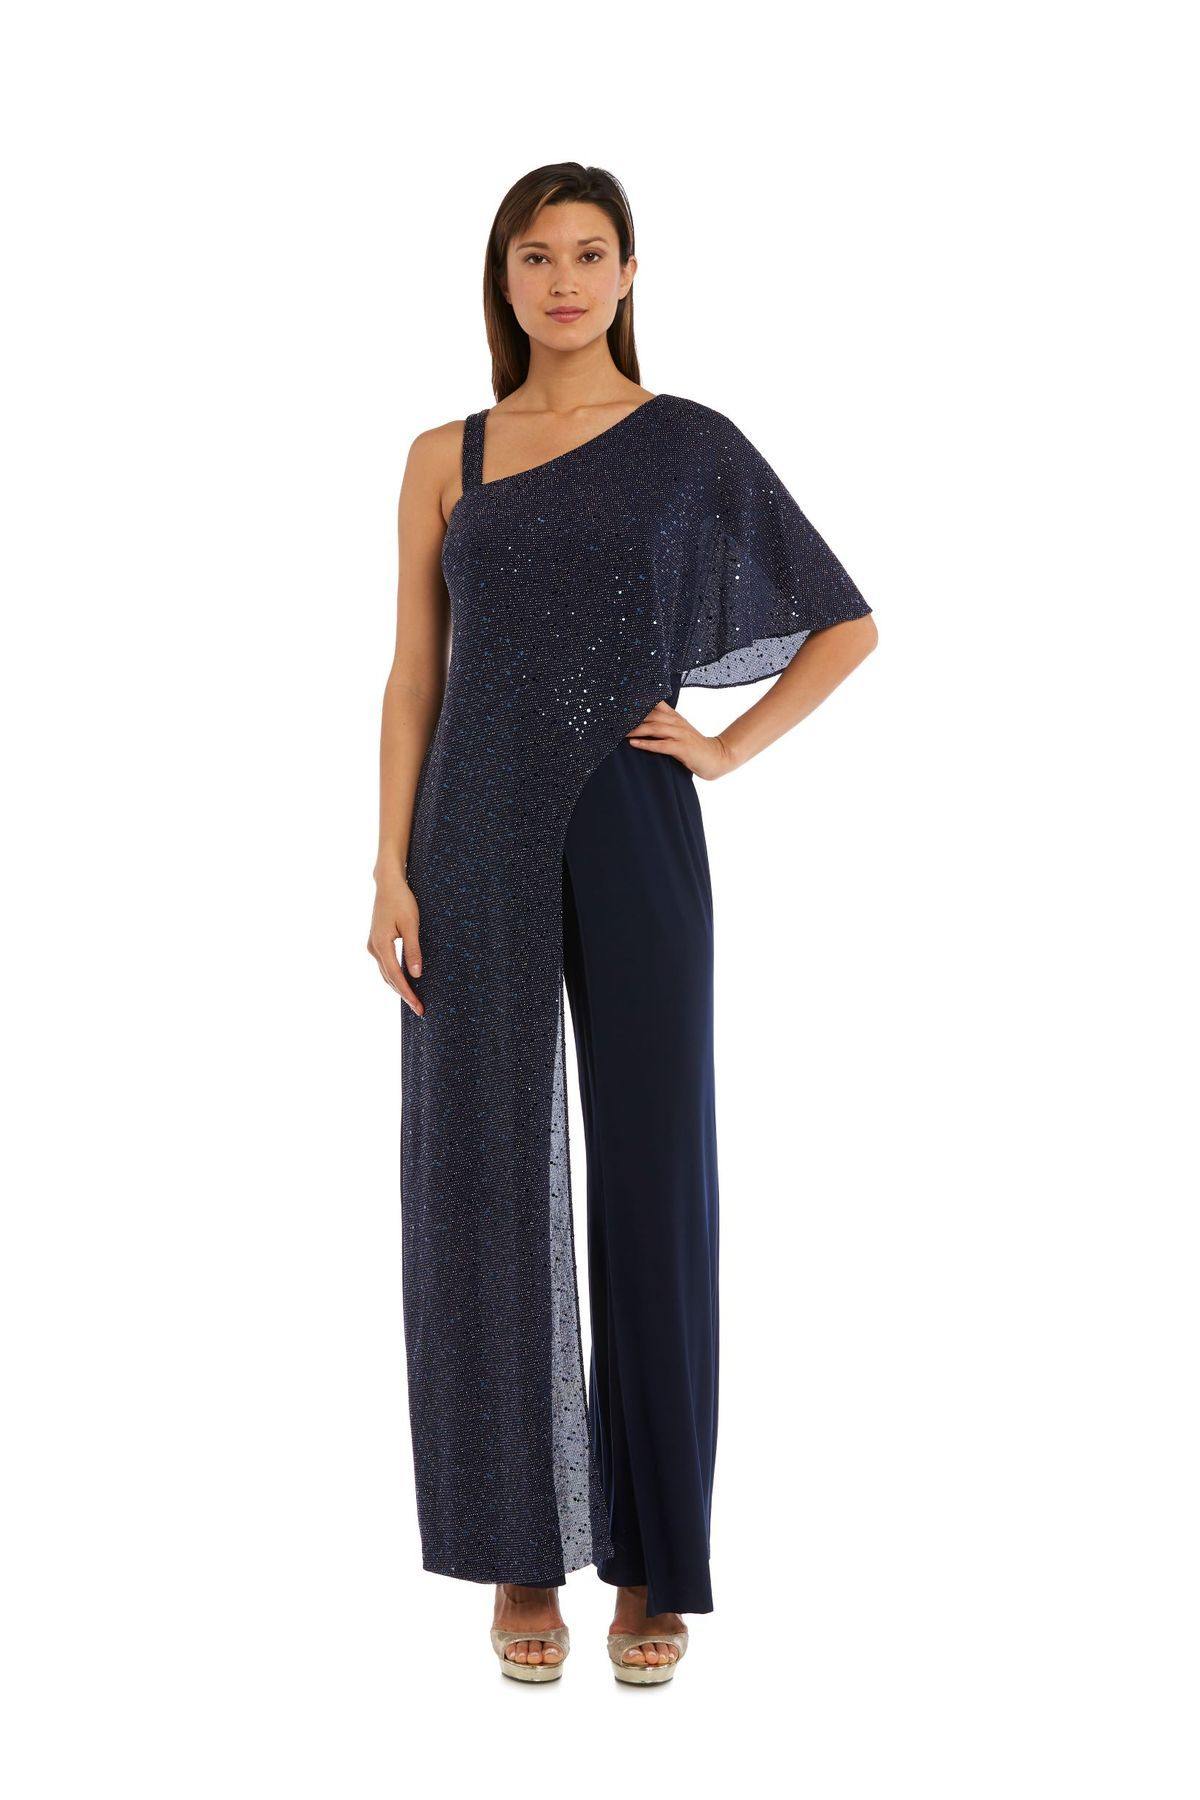 R&M Richards Asymmetric Jumpsuit with Sequined Overlay 3096 - The Dress Outlet